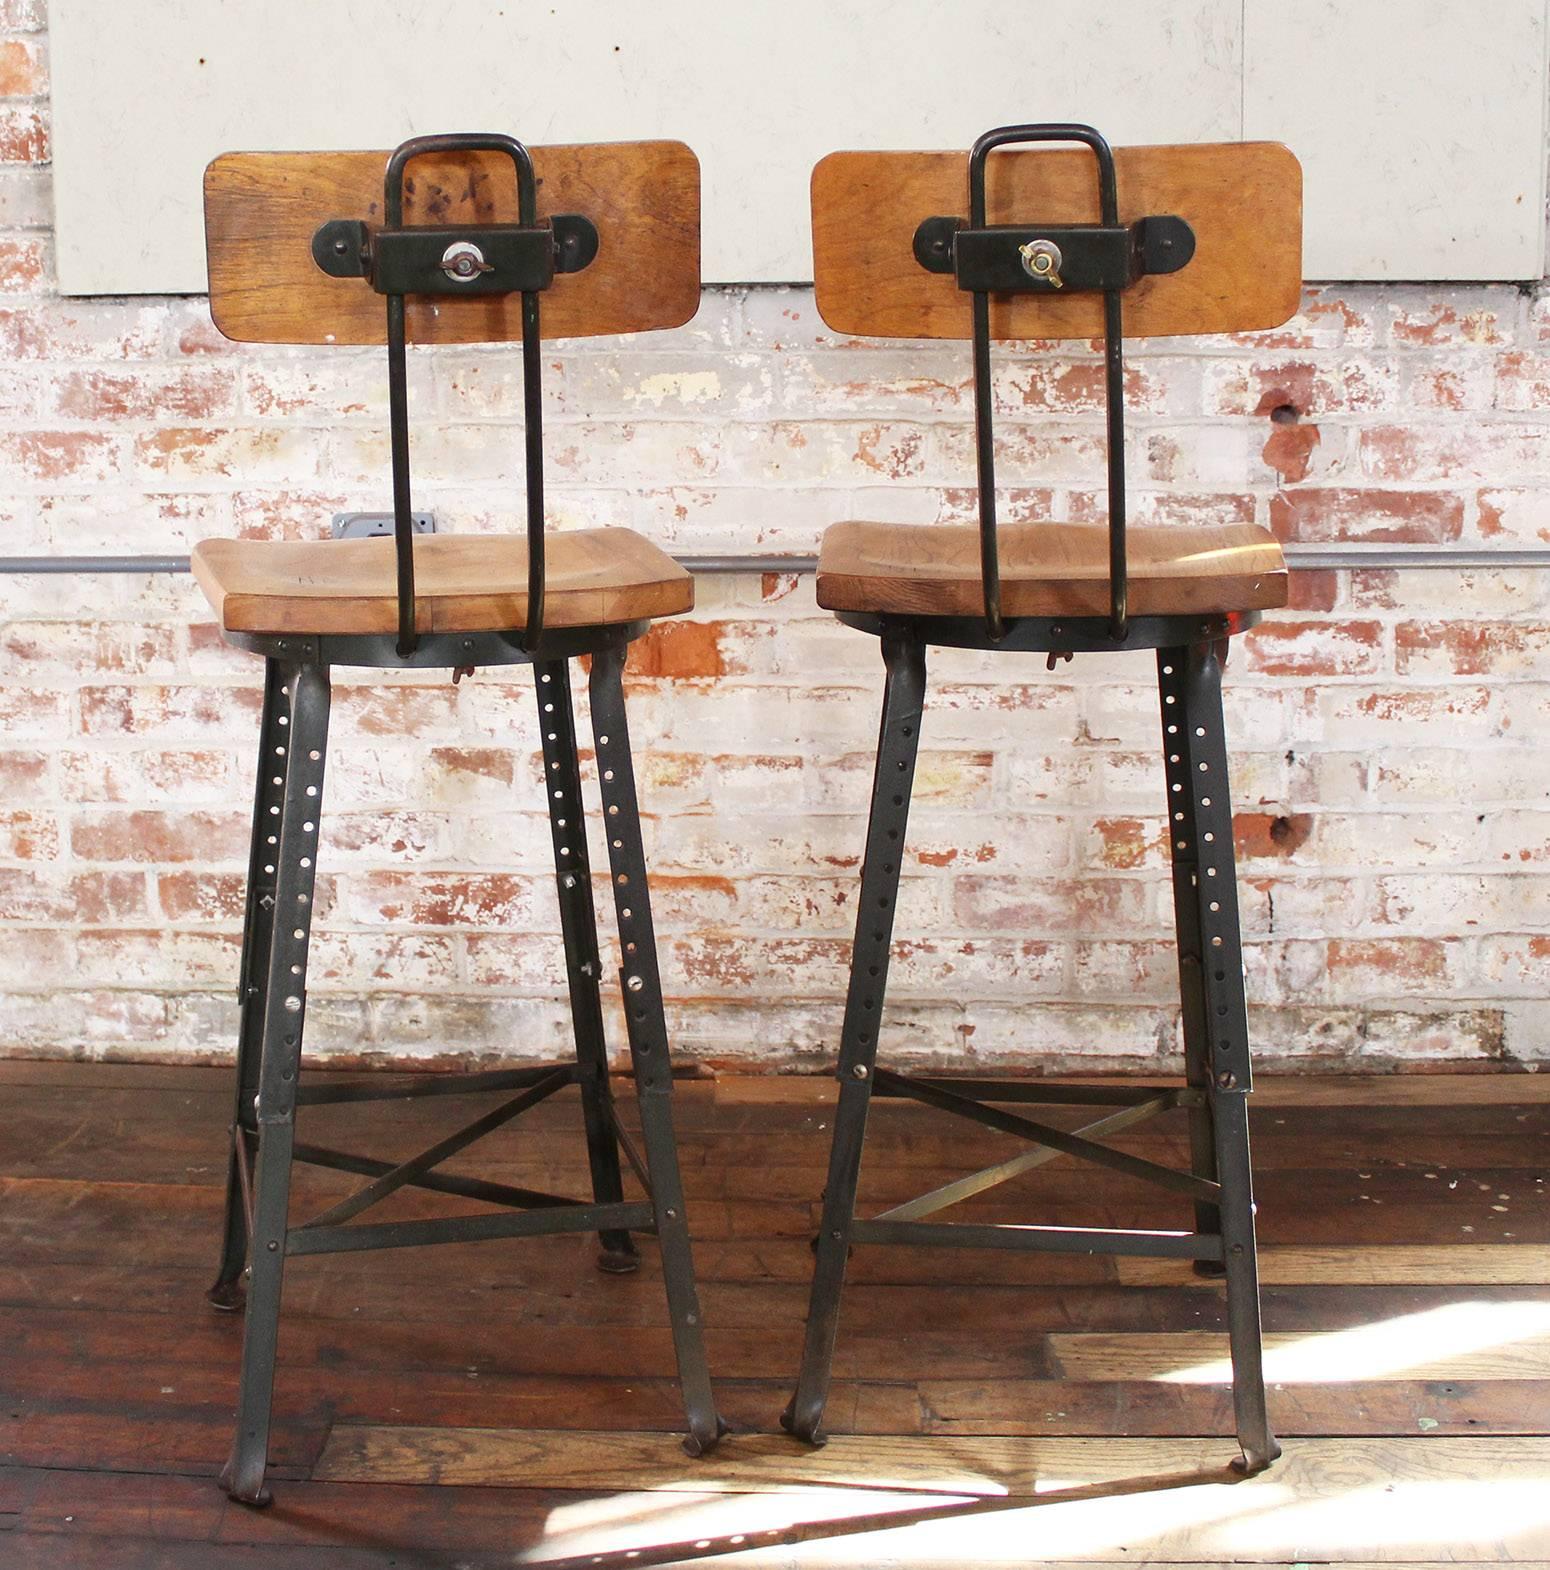 Pair of vintage Industrial adjustable wood and metal factory shop bar stools. Great condition, adjustable seat height and seat backs. Overall dimensions are set at 38" in height, 15 1/4" in width and 19" in depth. Seat measures 14